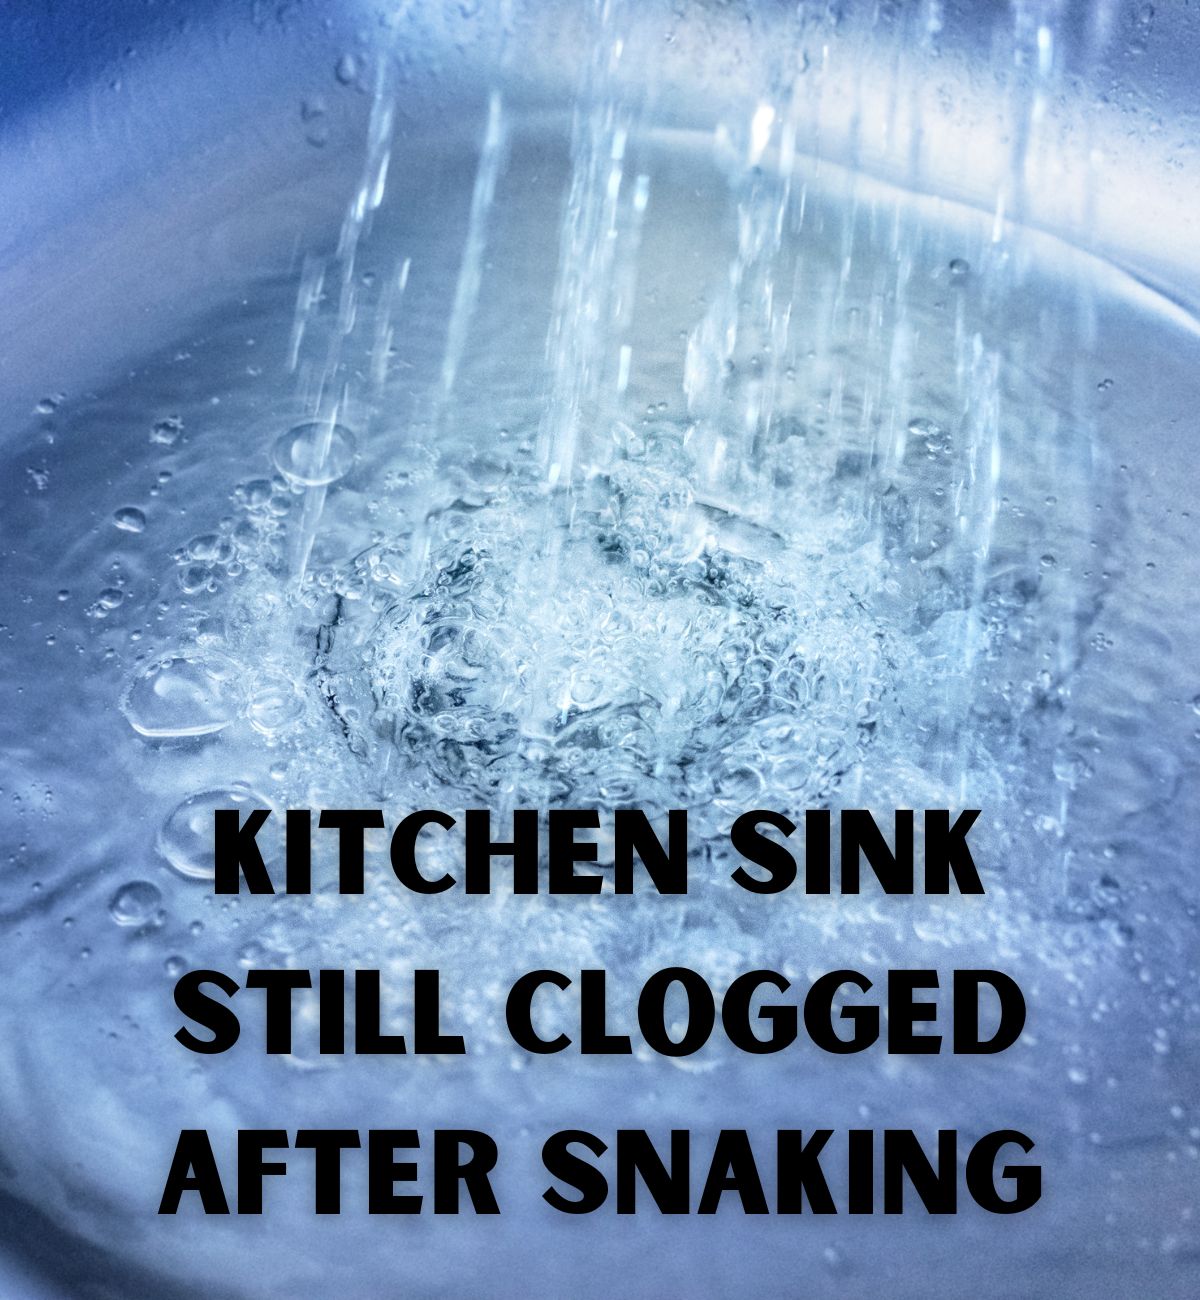 Snake from kitchen came out of bath sink, still clogged : r/Plumbing